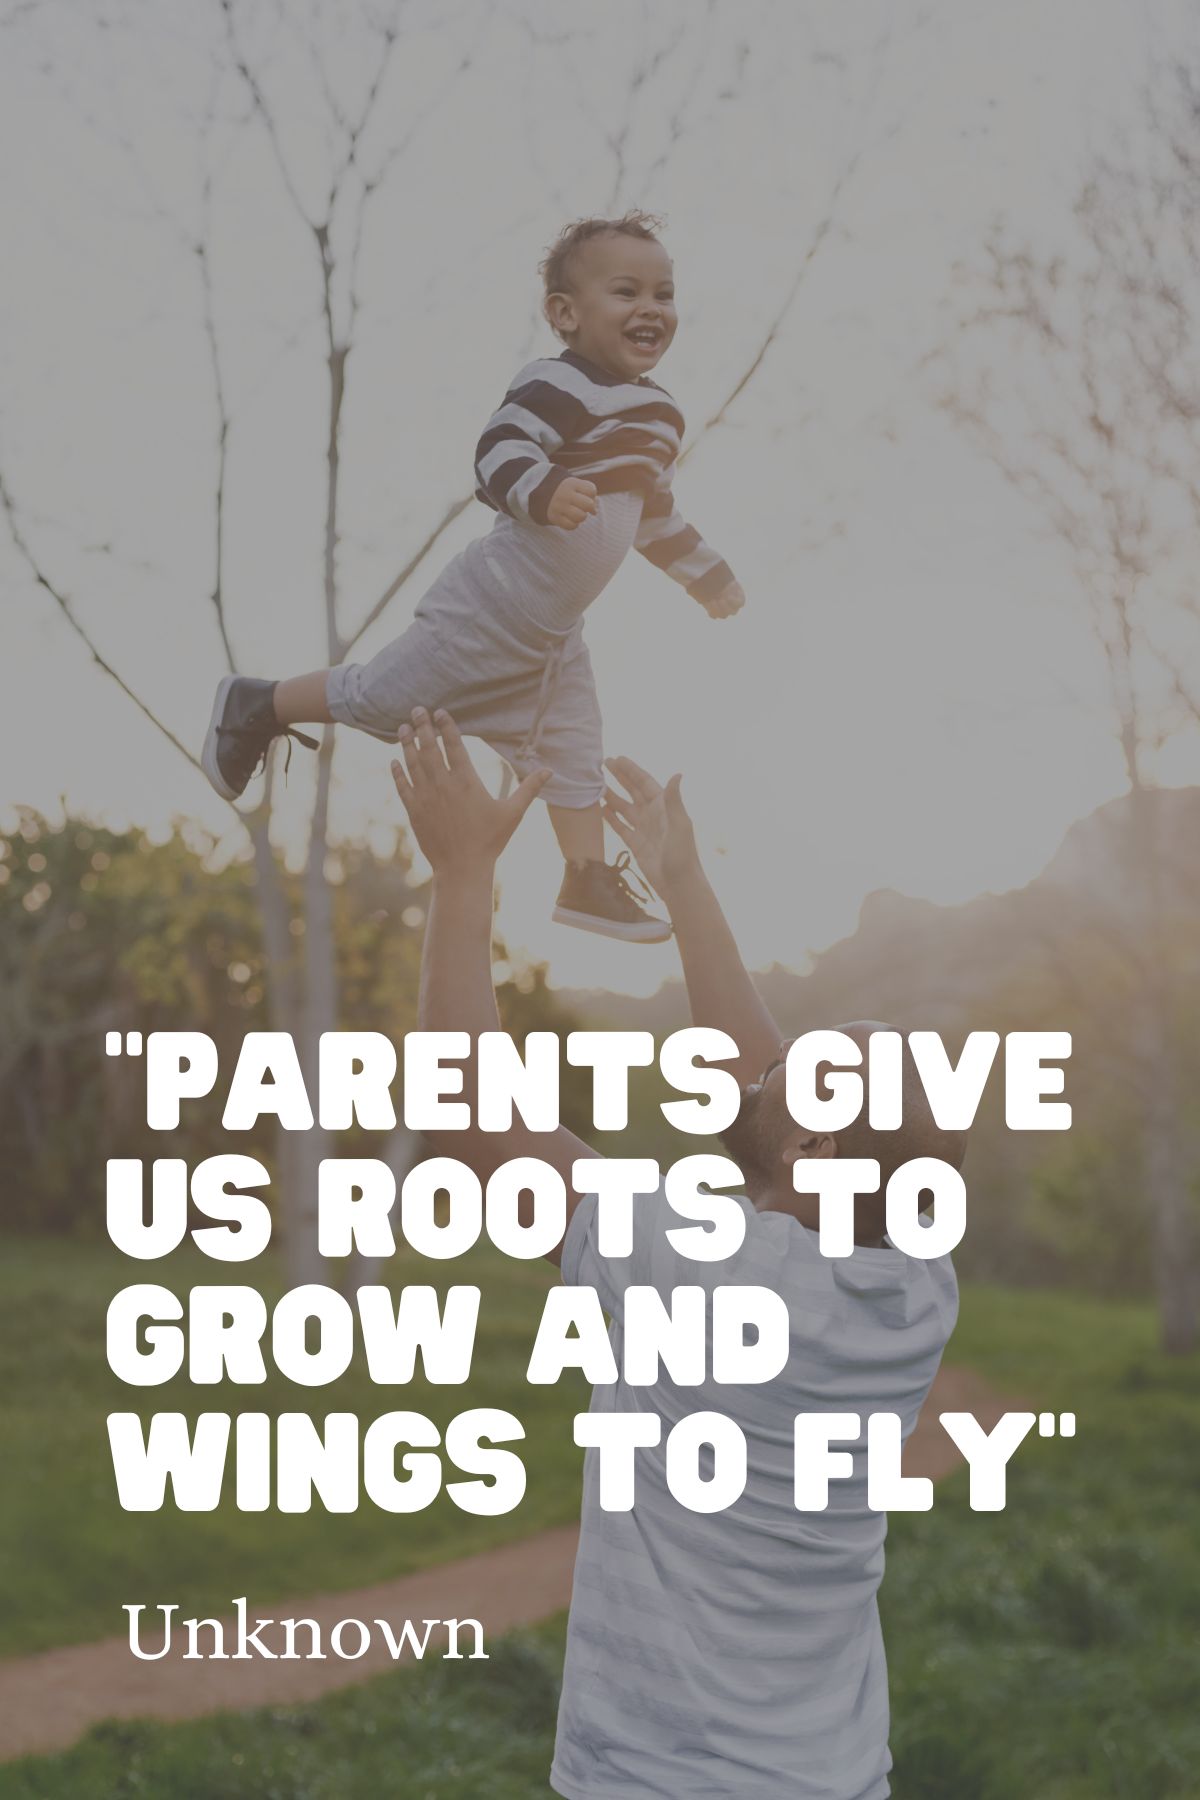 "Parents give us roots to grow and wings to fly" – Unknown